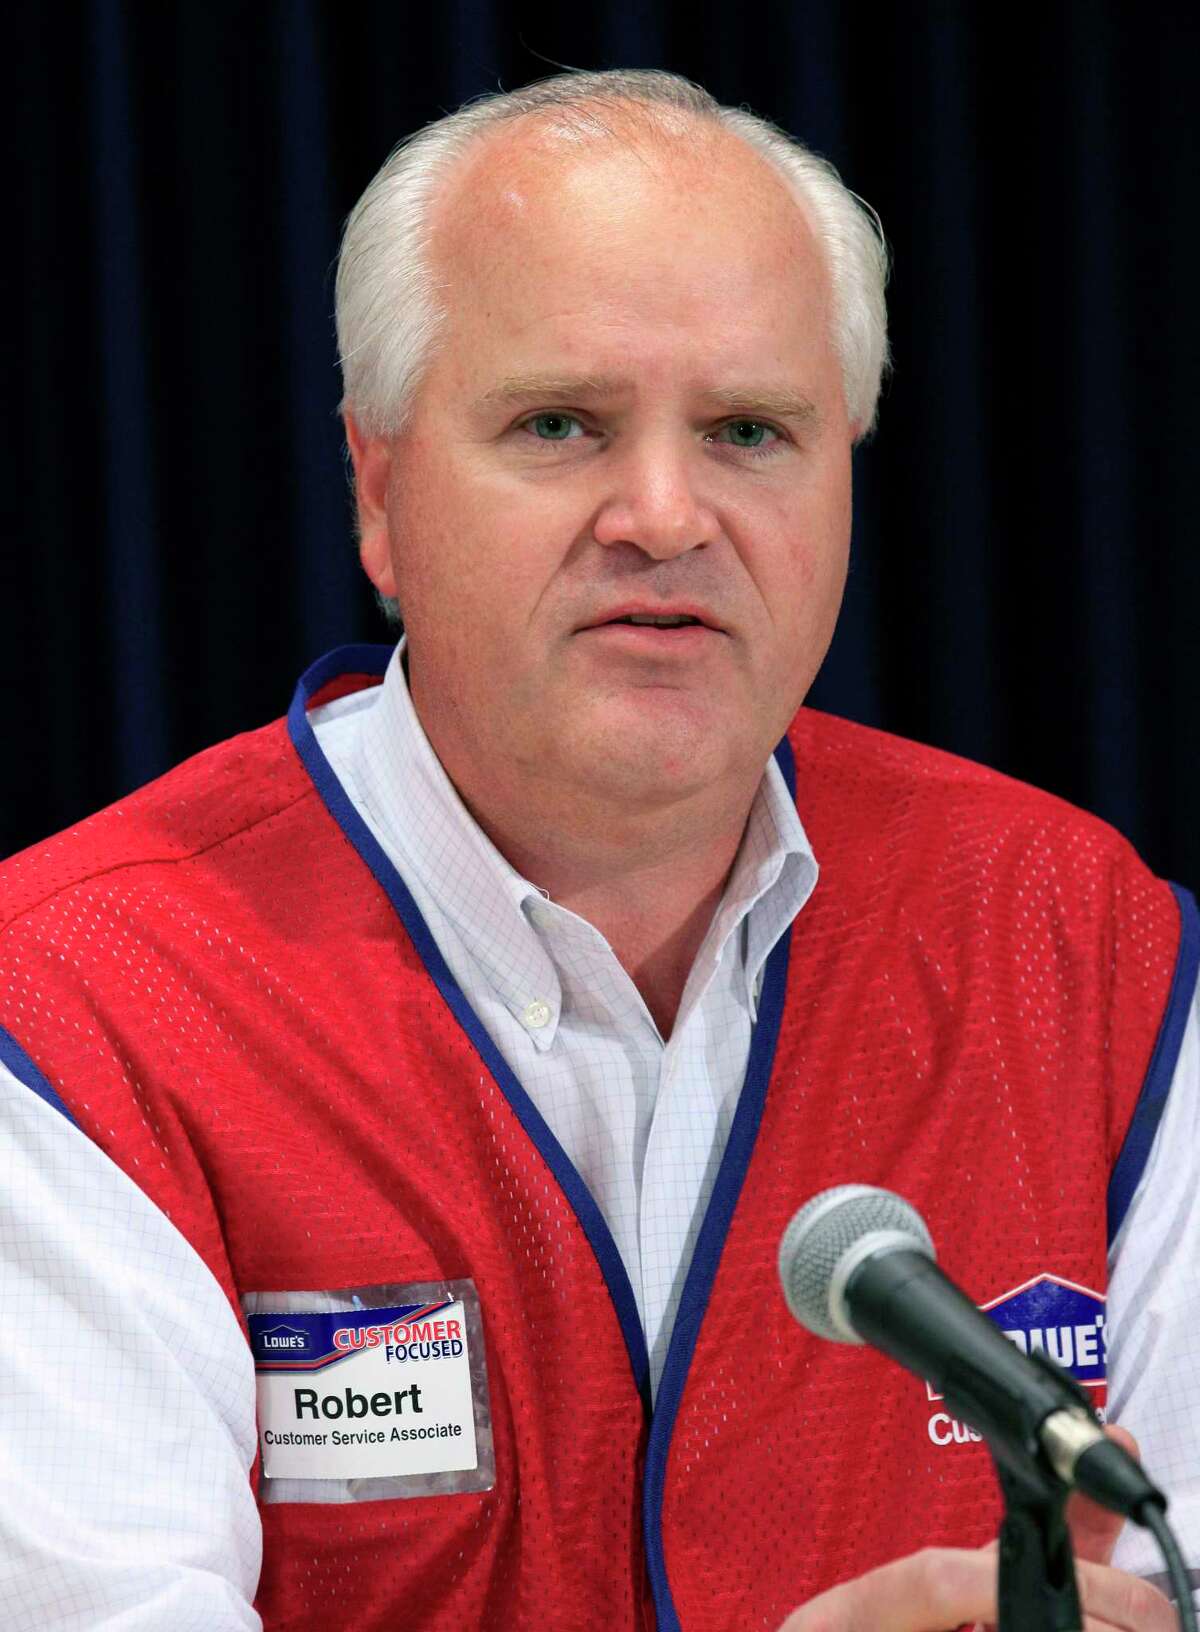 FILE- In this Nov. 8, 2012, file photo, Chairman and CEO of Lowe's Robert Niblock attends a news conference in New York. Niblock, who's worked for the home improvement retailer for 25 years, is retiring. Niblock will stay in his roles on an interim basis while Lowe's looks for a successor. (AP Photo/Richard Drew, File)